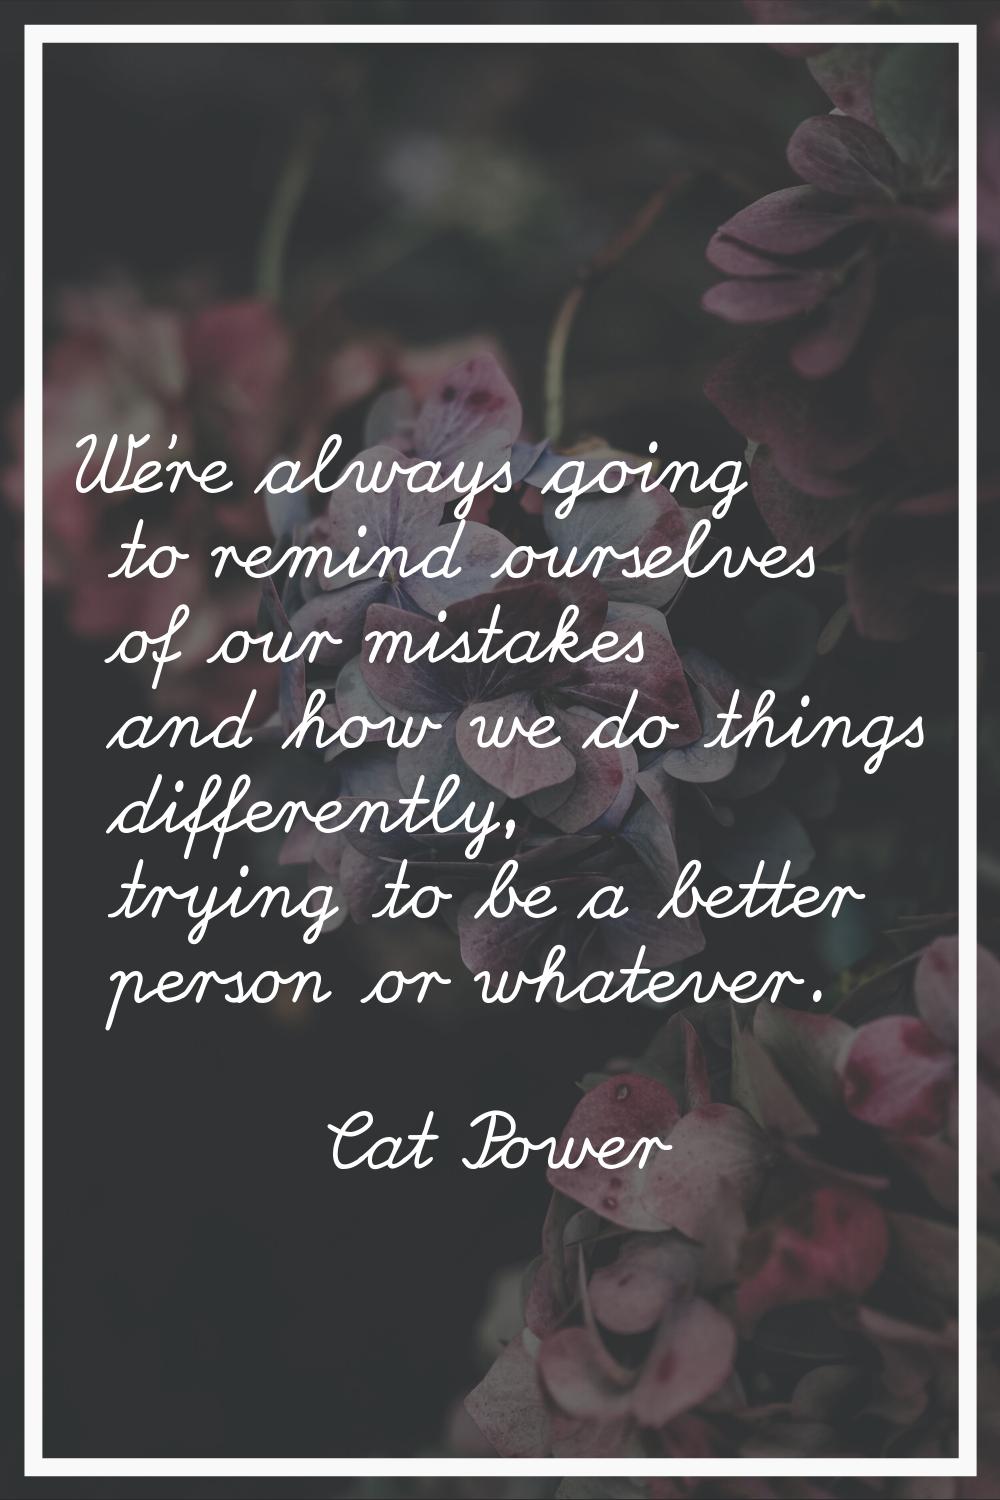 We're always going to remind ourselves of our mistakes and how we do things differently, trying to 